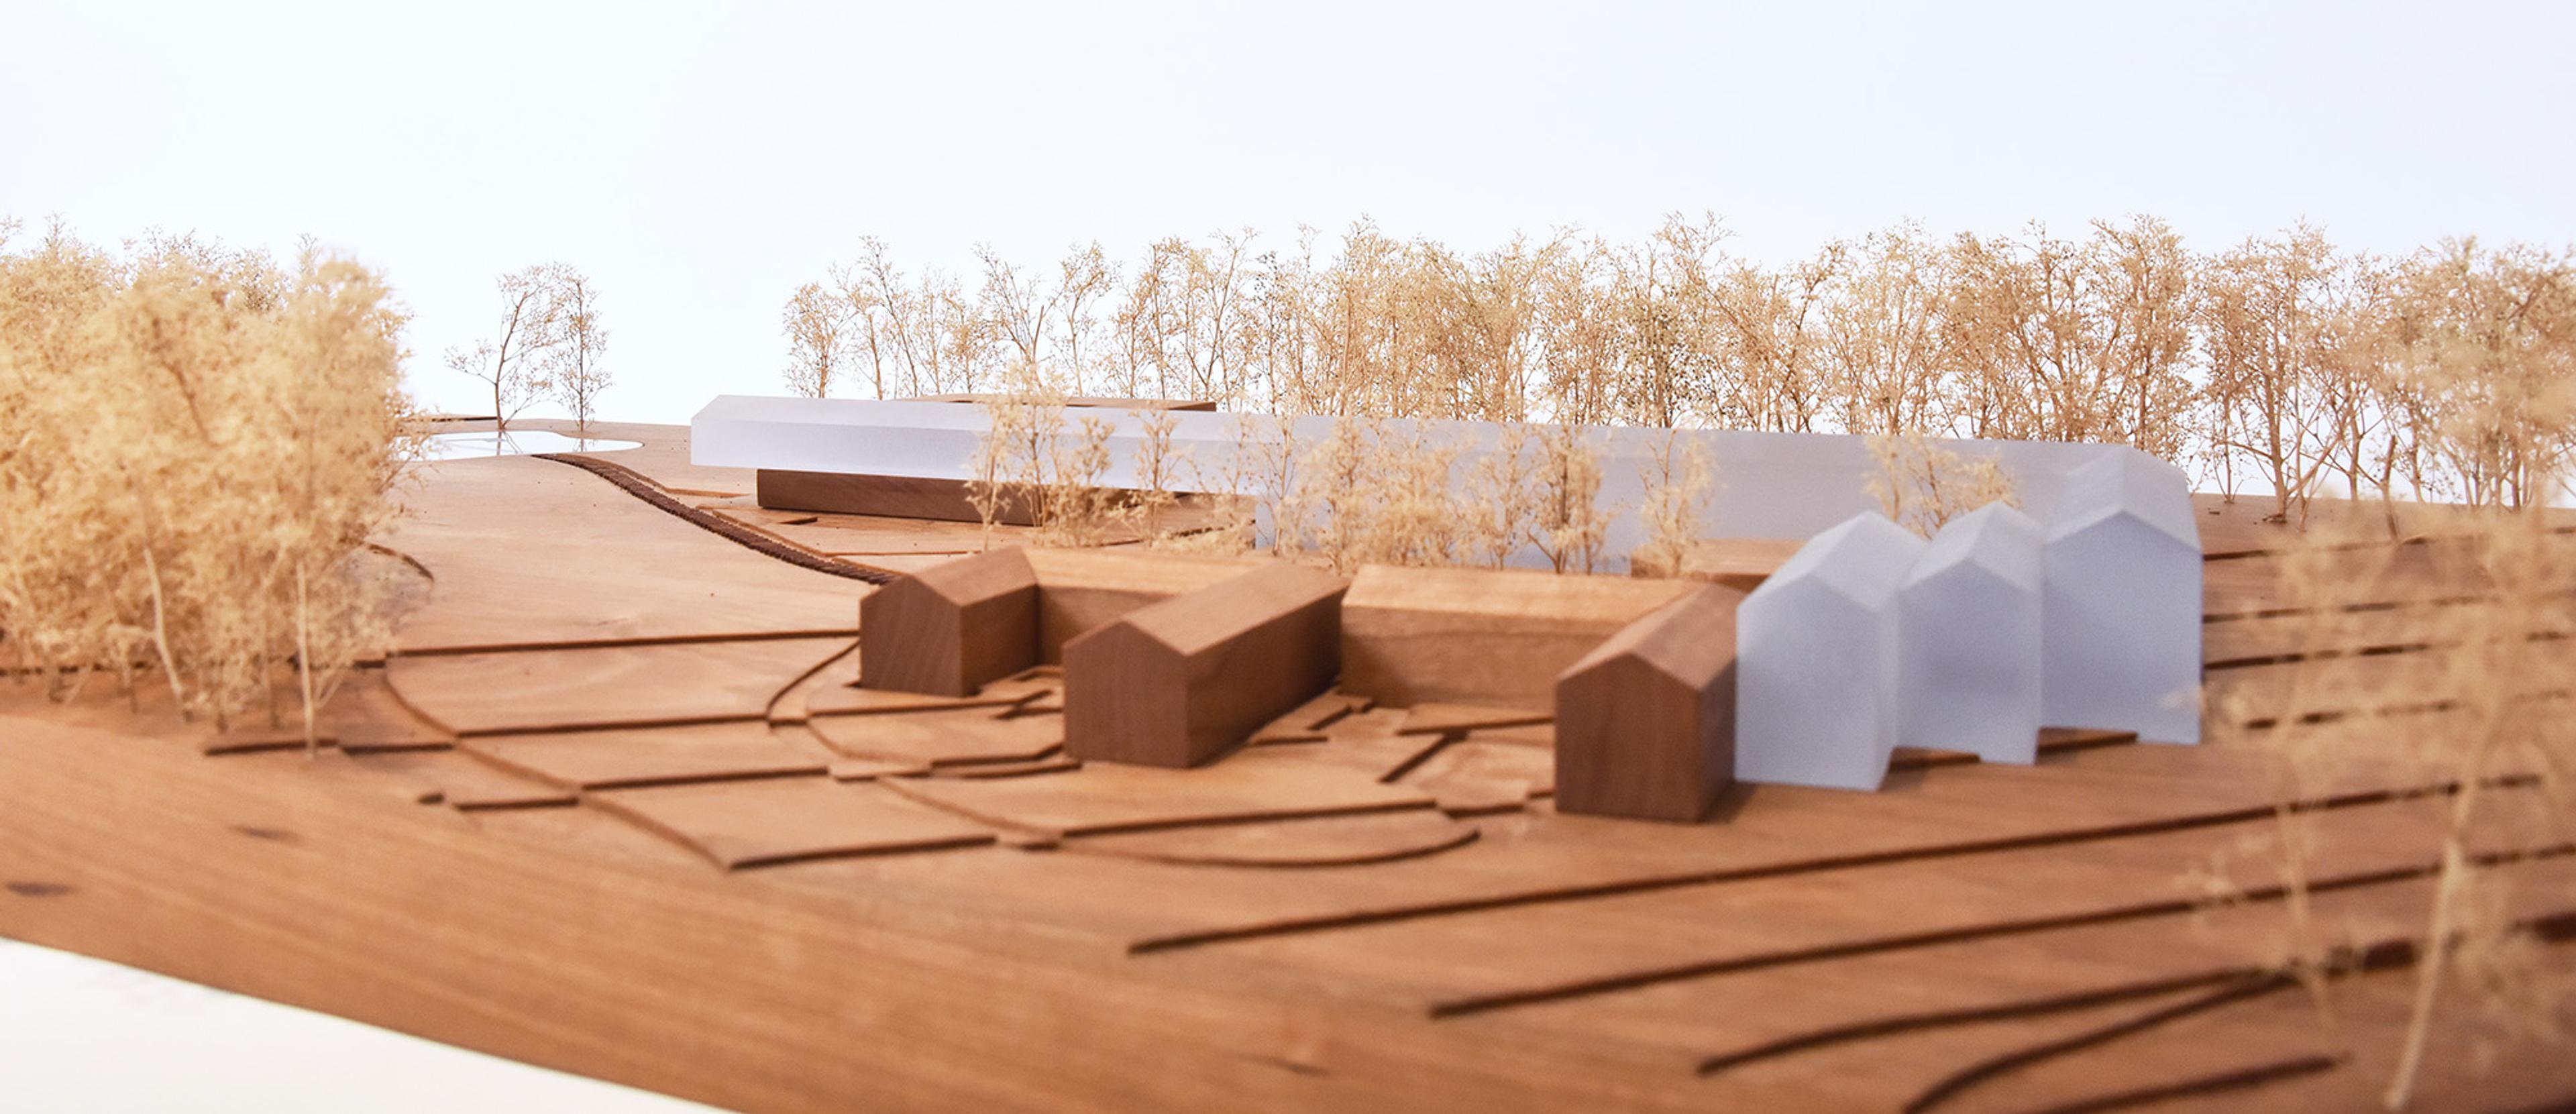 architectural model of modern structure on a hill within a forest